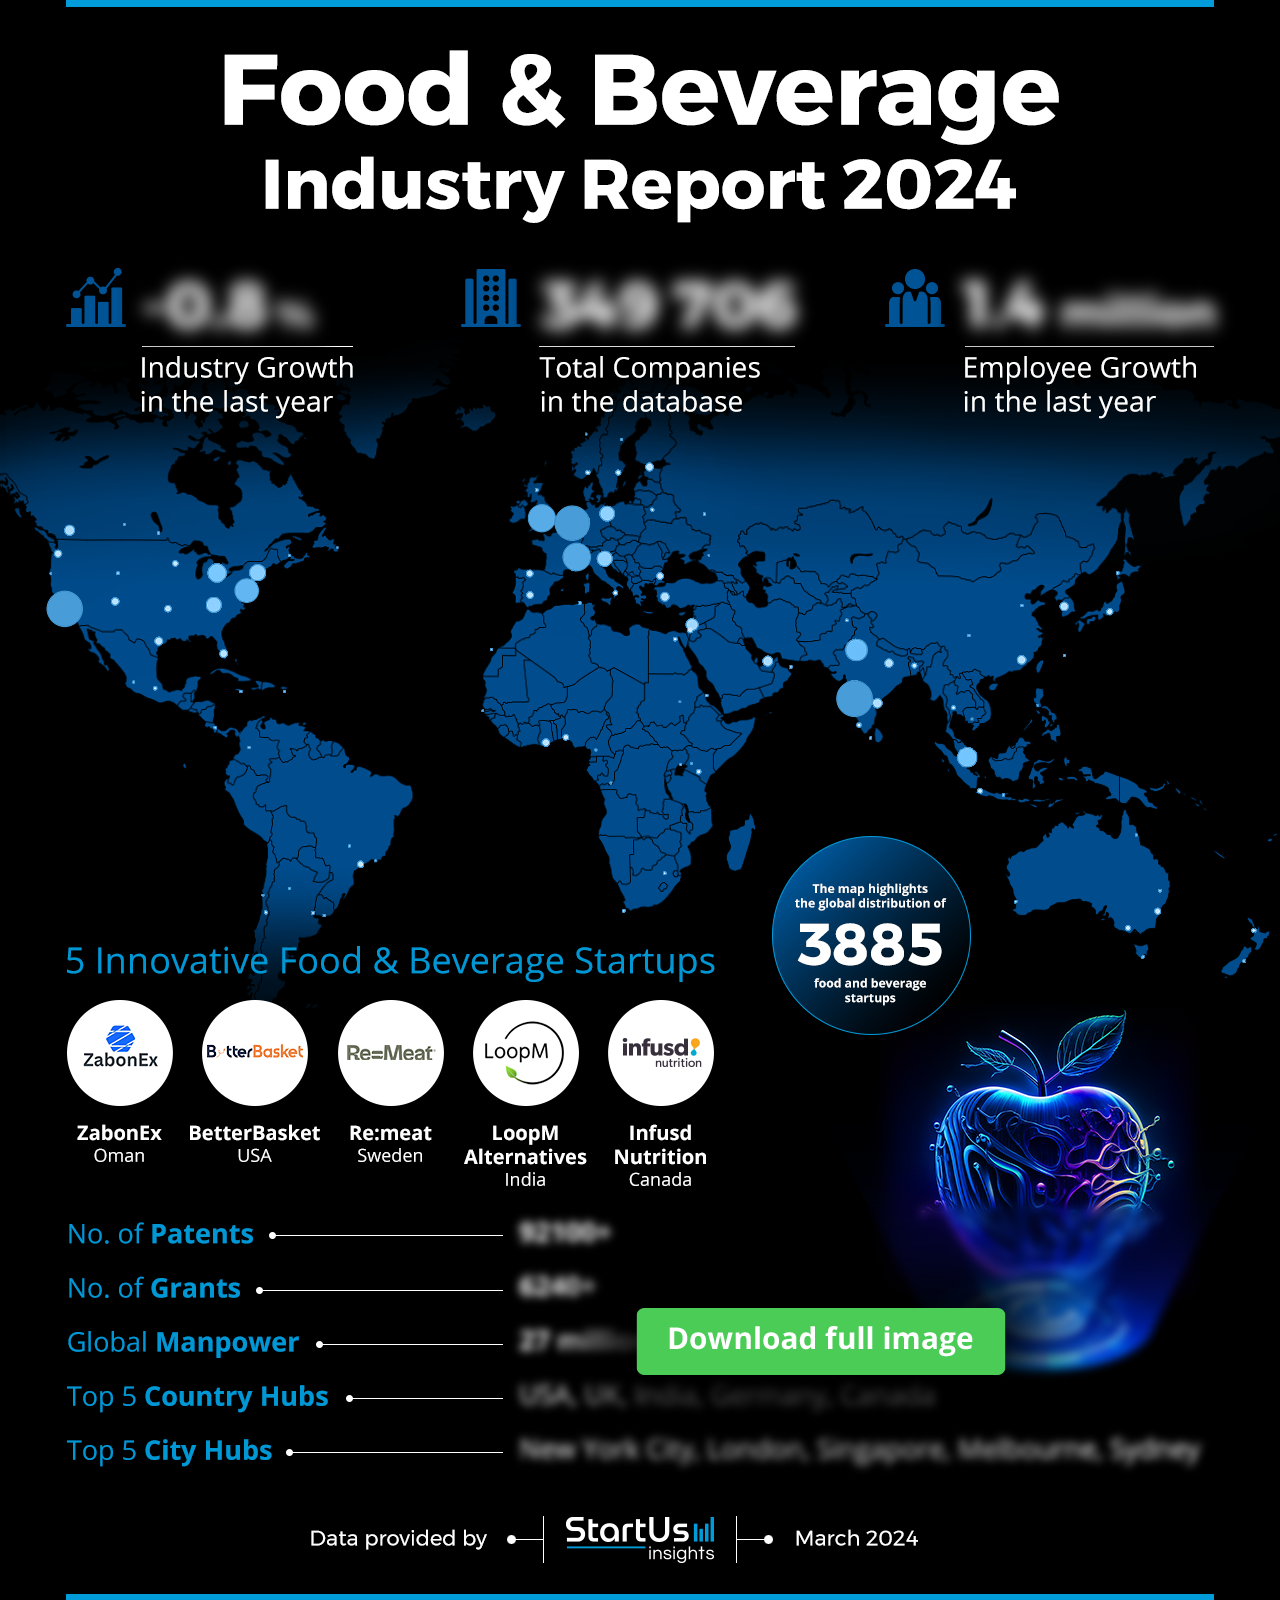 Food and Beverage Industry Report 2024 | StartUs Insights